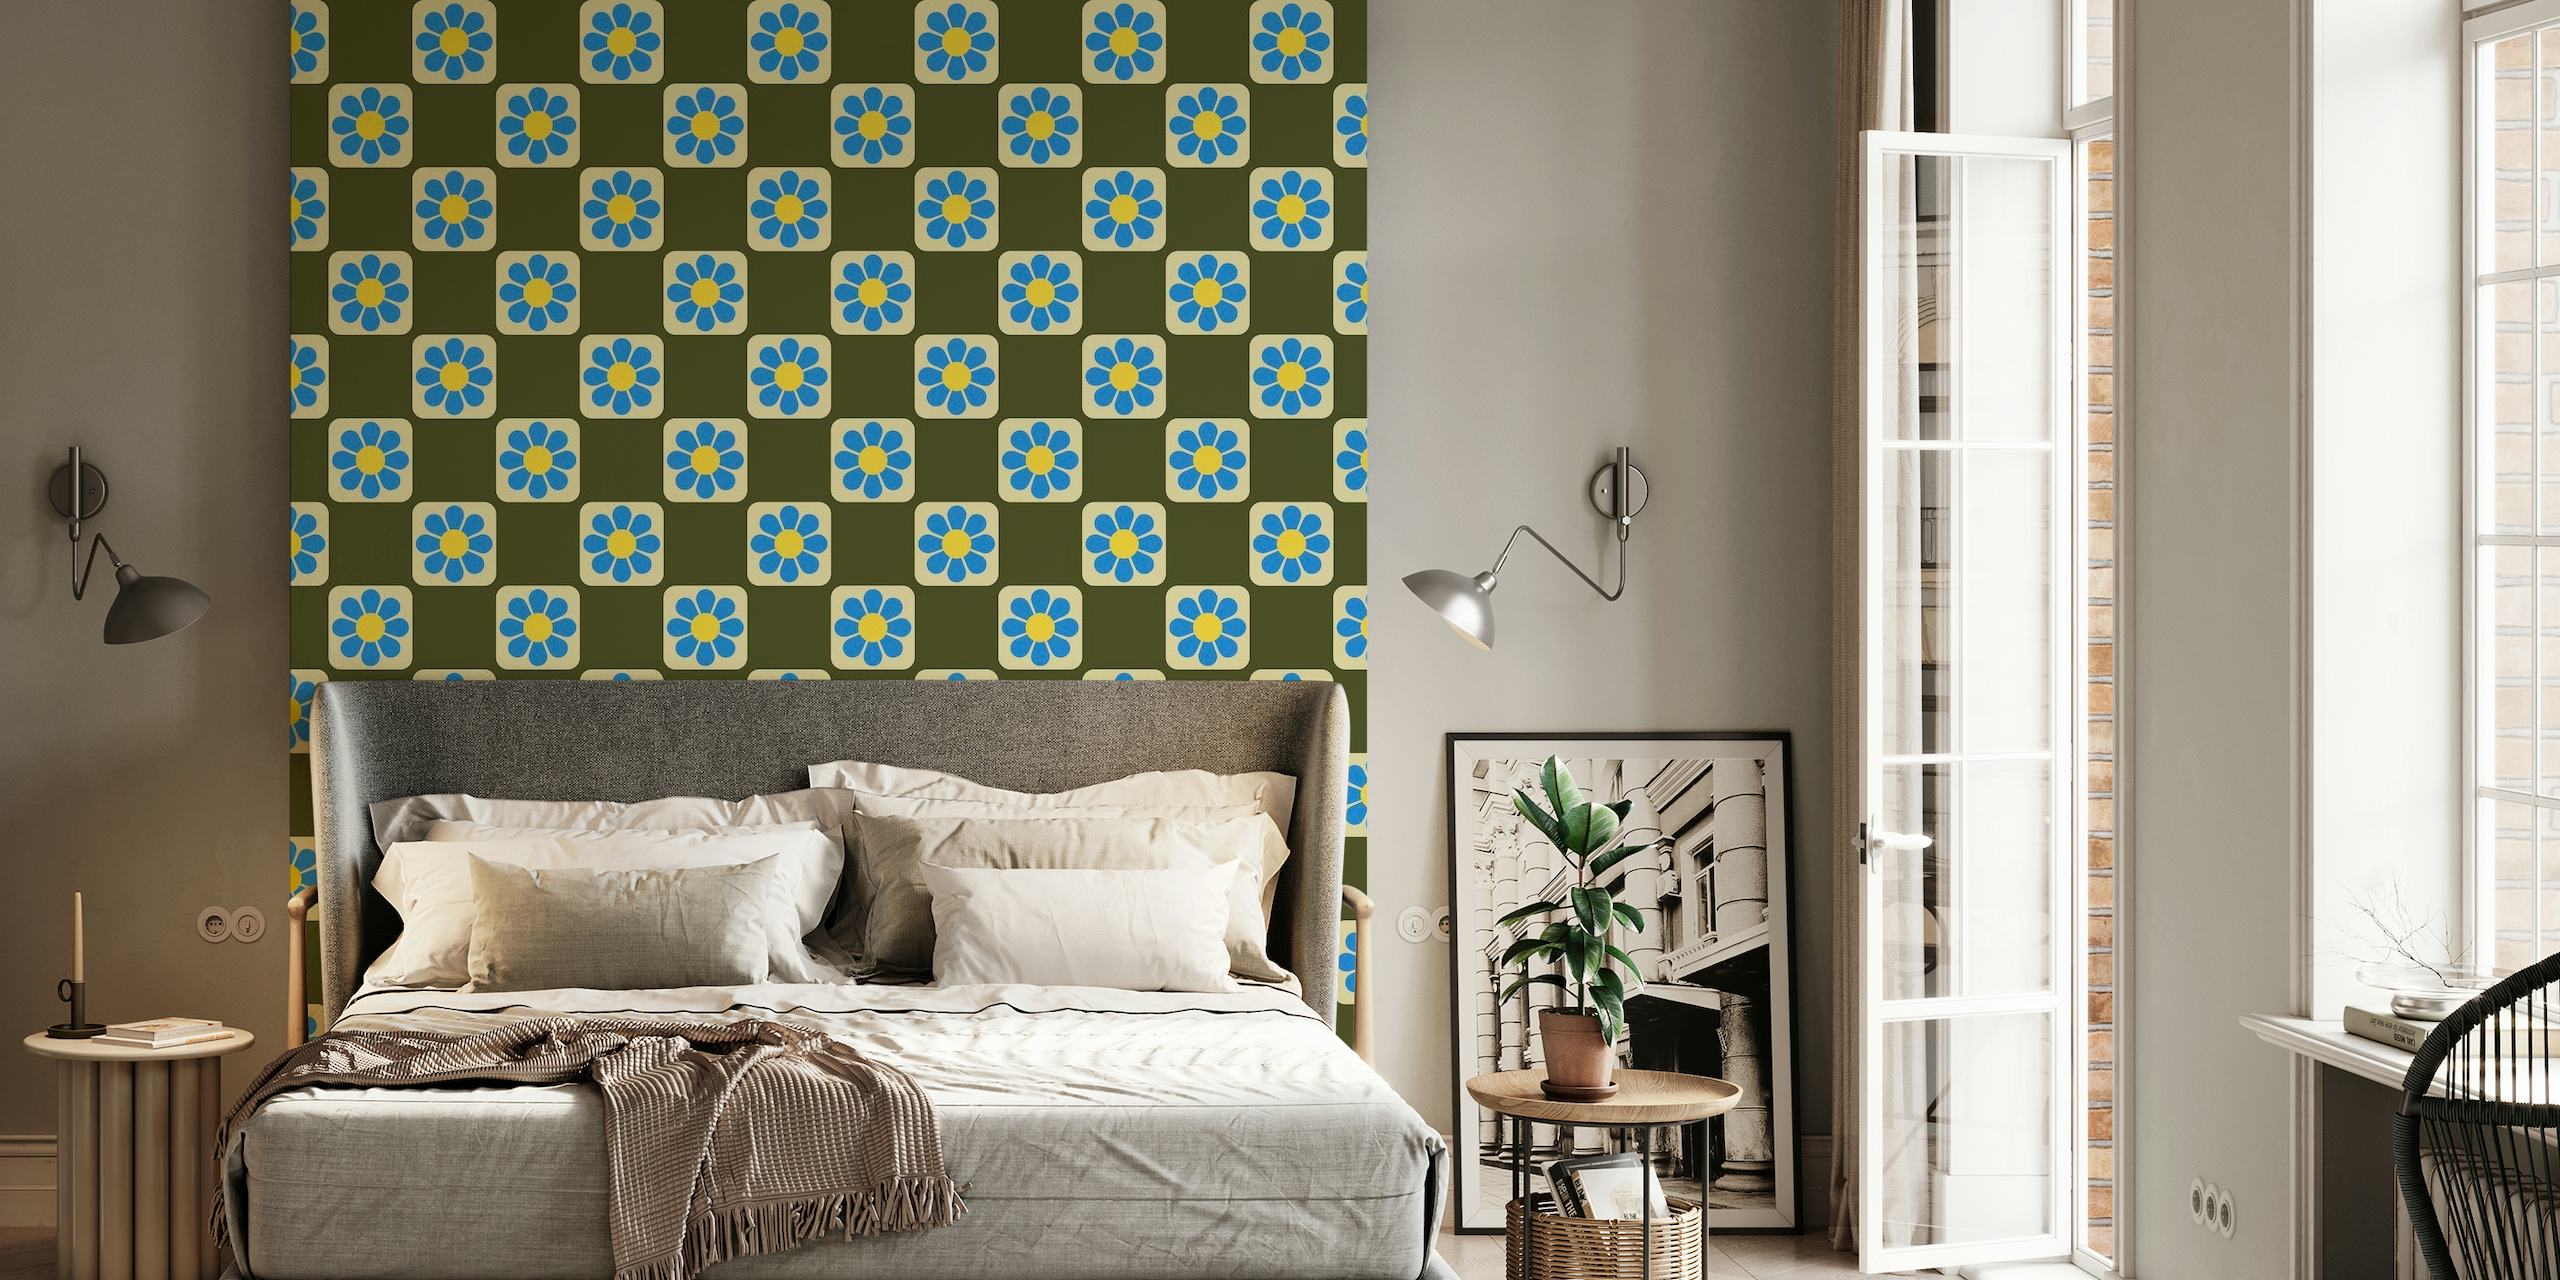 Retro Floral Checkerboard in Green and Blue wallpaper